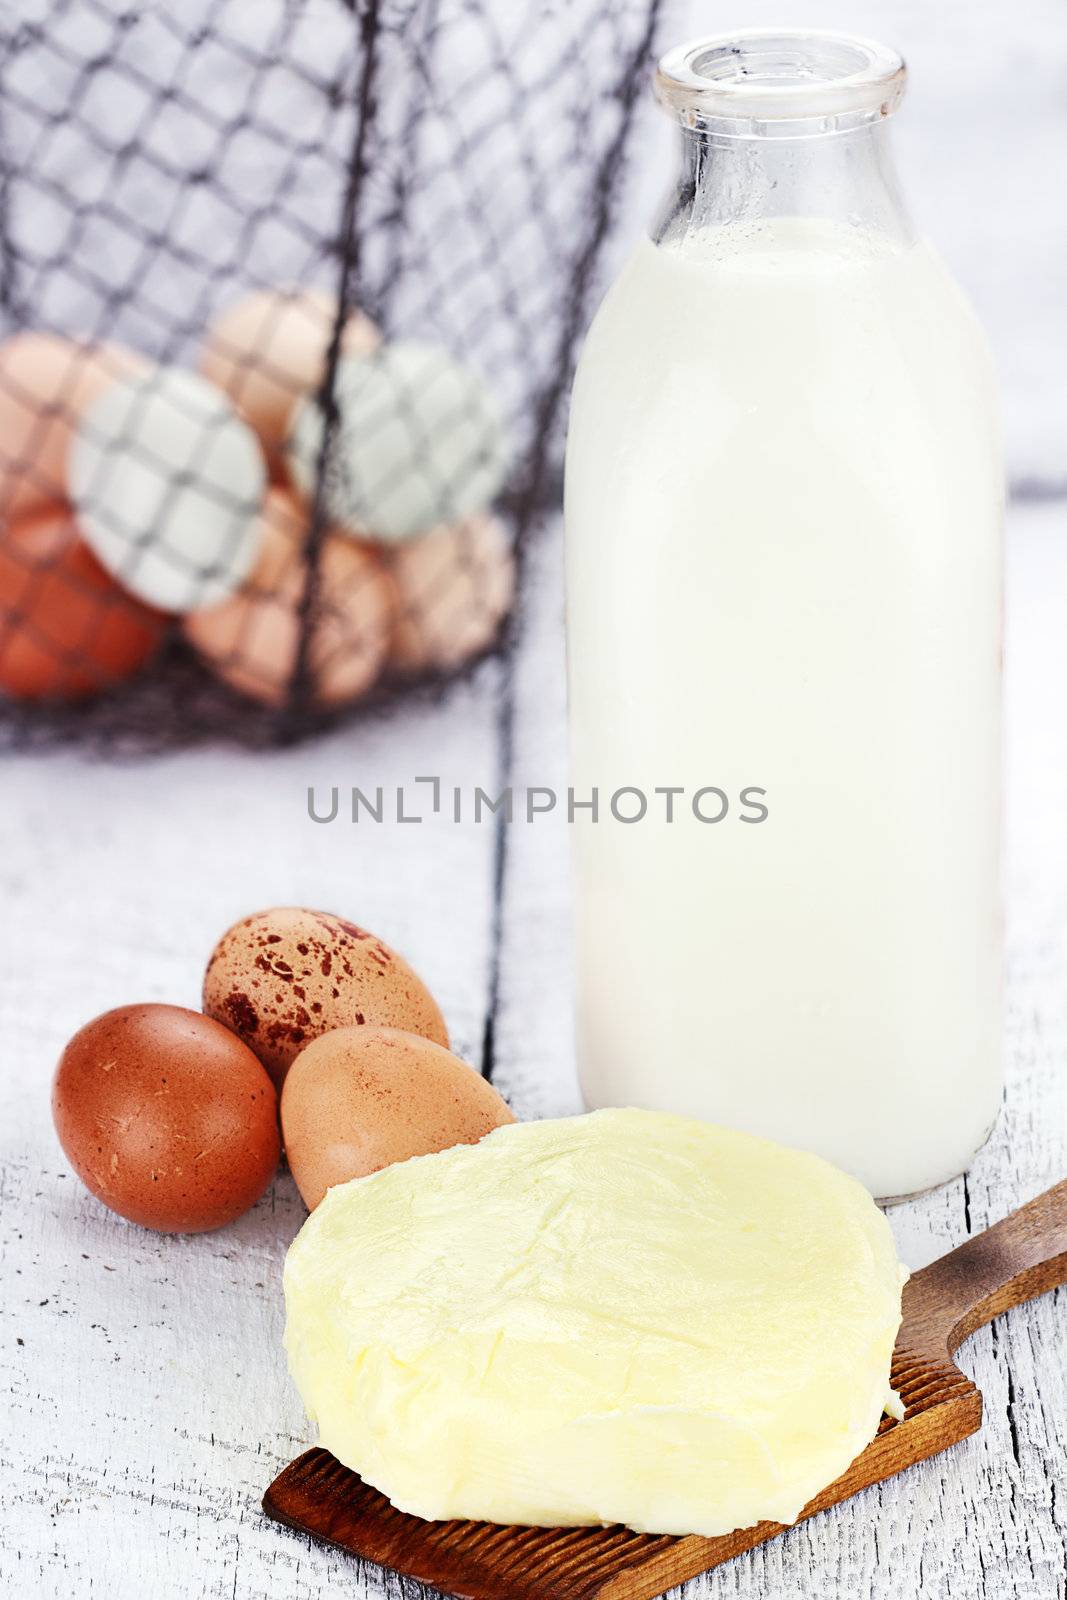 Farm fresh milk, butter, and eggs against a rustic background with basket of eggs. Milk is in a vintage glass milk bottle. Shallow depth of field. 